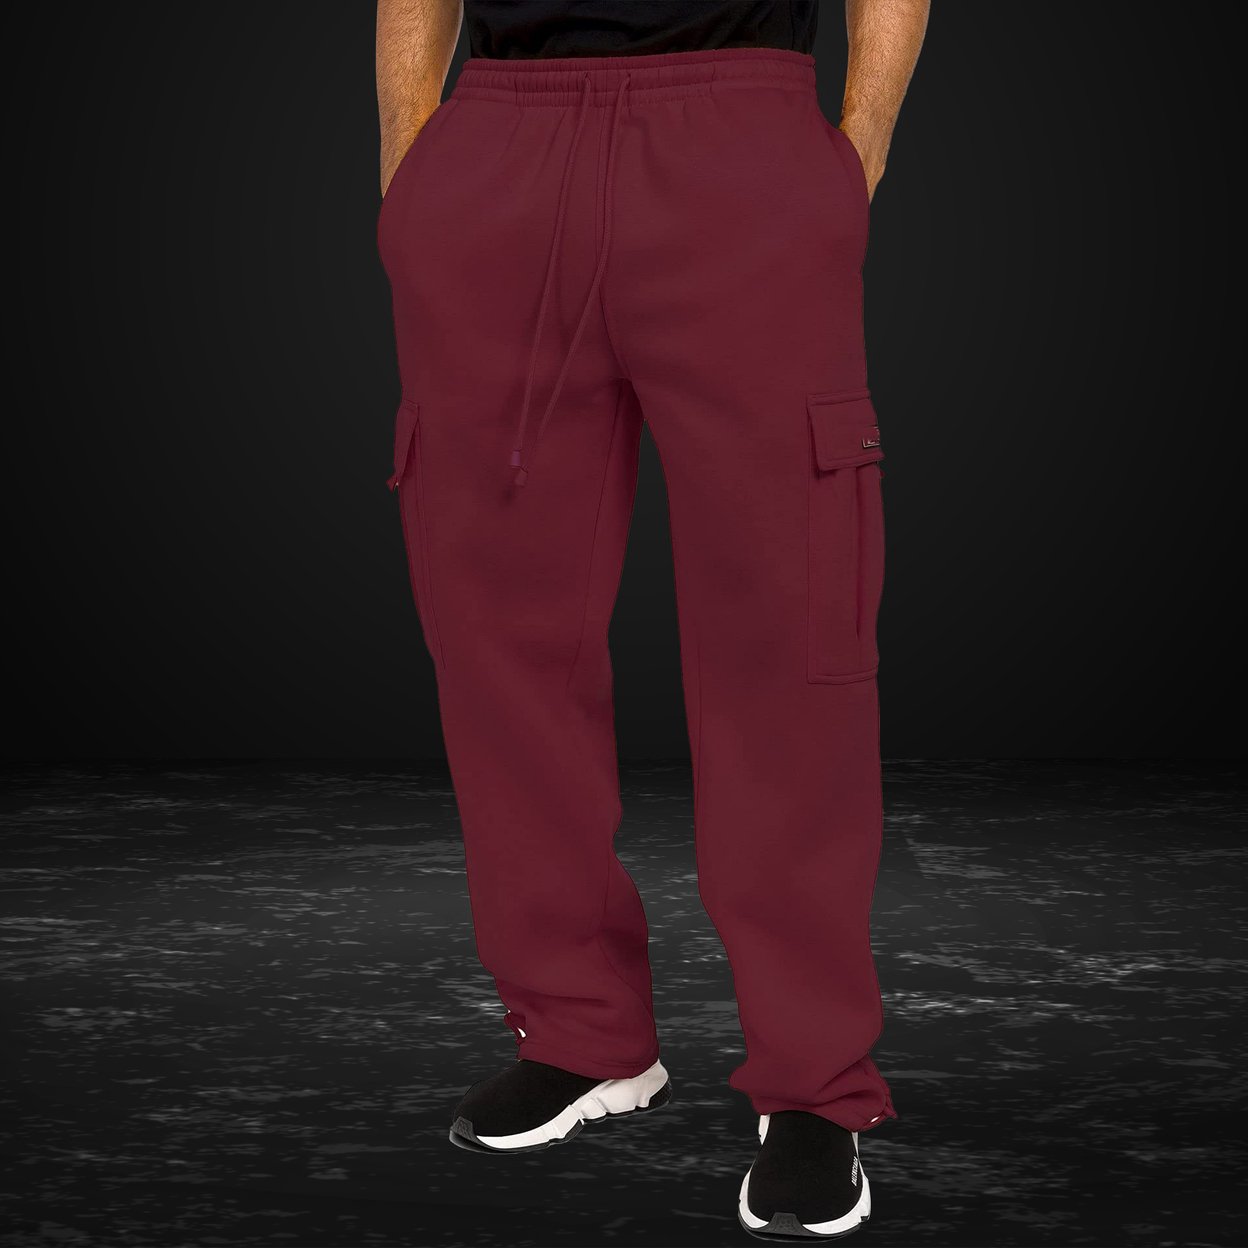 Multipack Men's Casual Solid Cargo Jogger Sweatpants With Pockets - 1, L